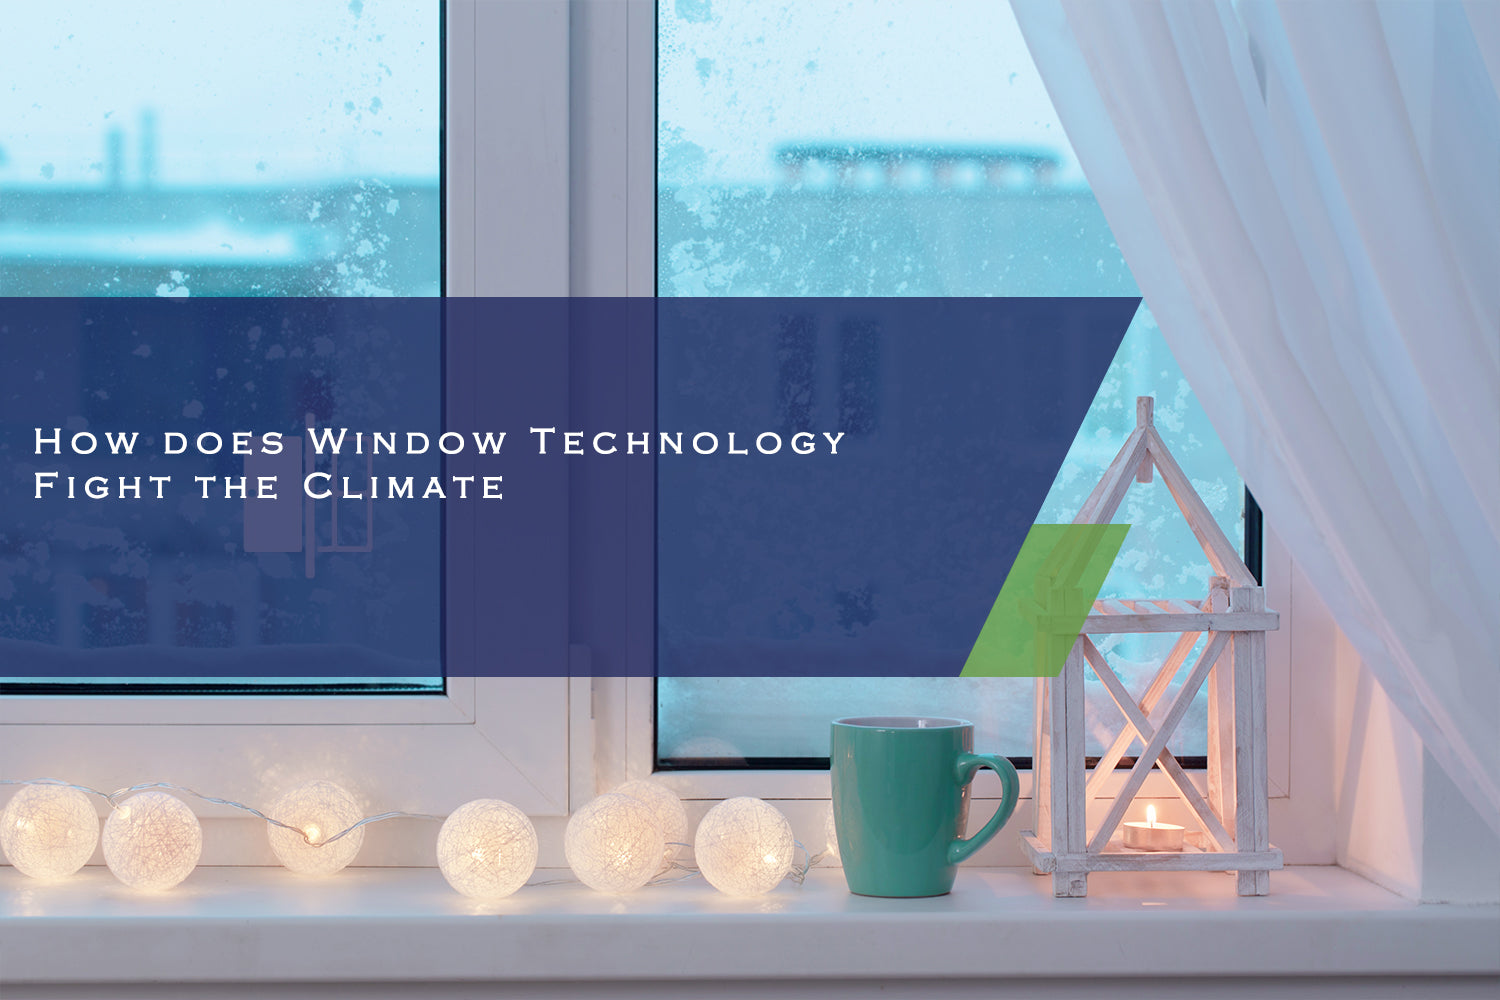 How does Window Technology Fight the Climate?